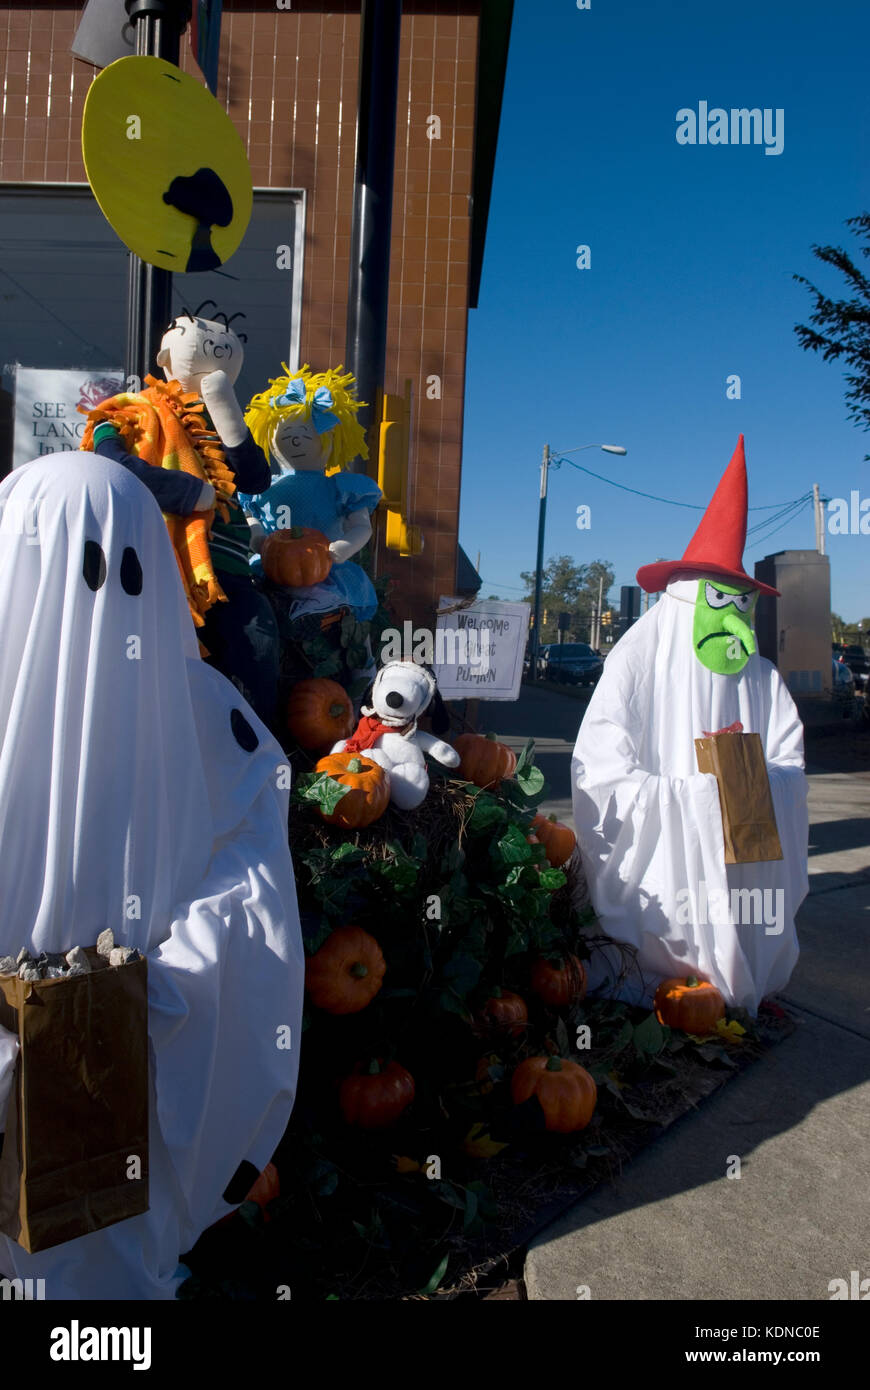 Halloween street display, USA. Display shows ghosts & goblins for All Hallow's Eve. Stock Photo